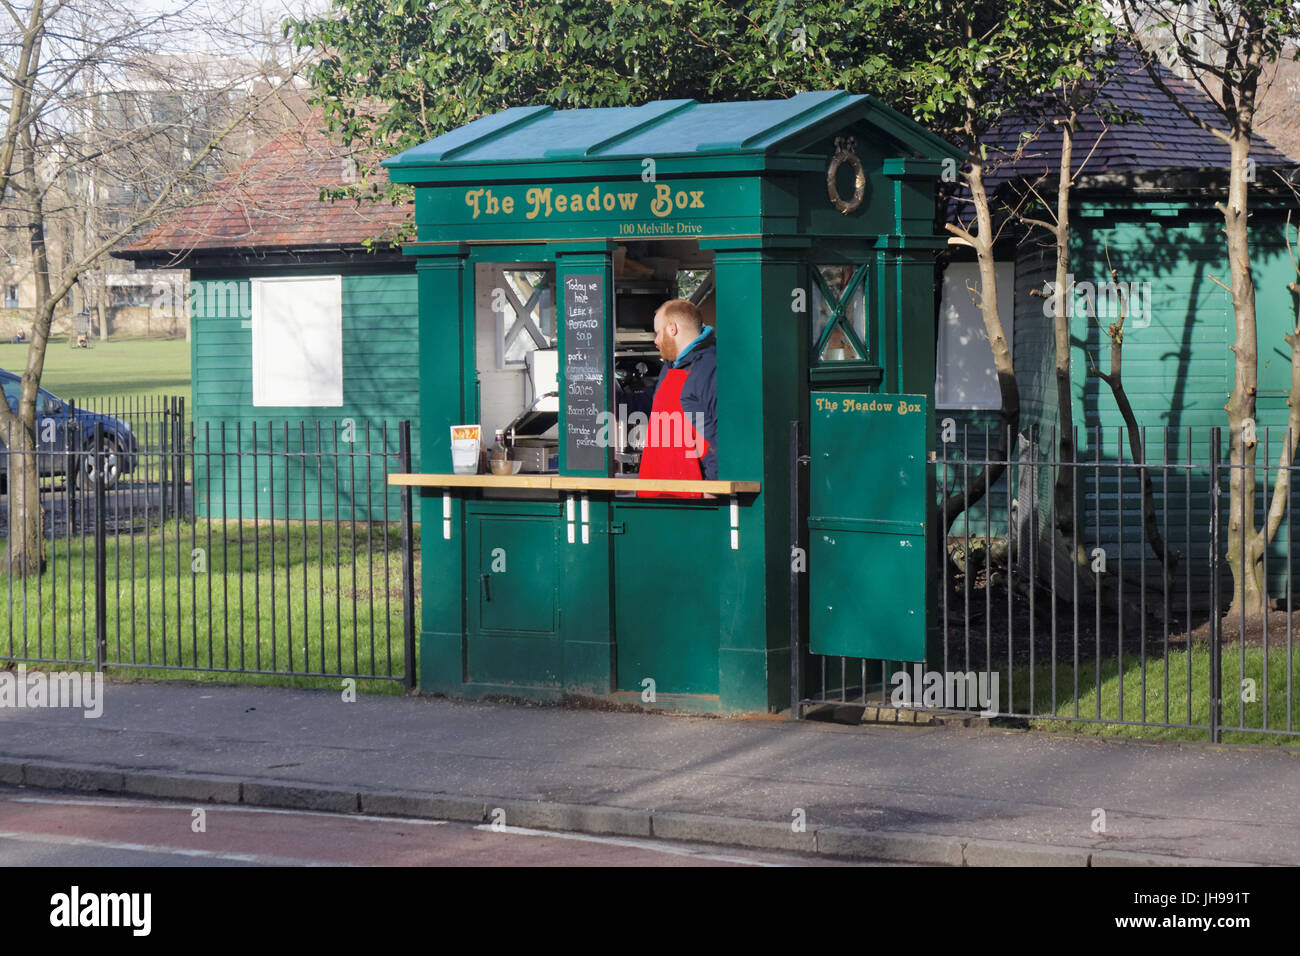 Edinburgh police box telephone Tardis converted to coffee and food takeaway kiosk the meadow box at the Meadows Stock Photo